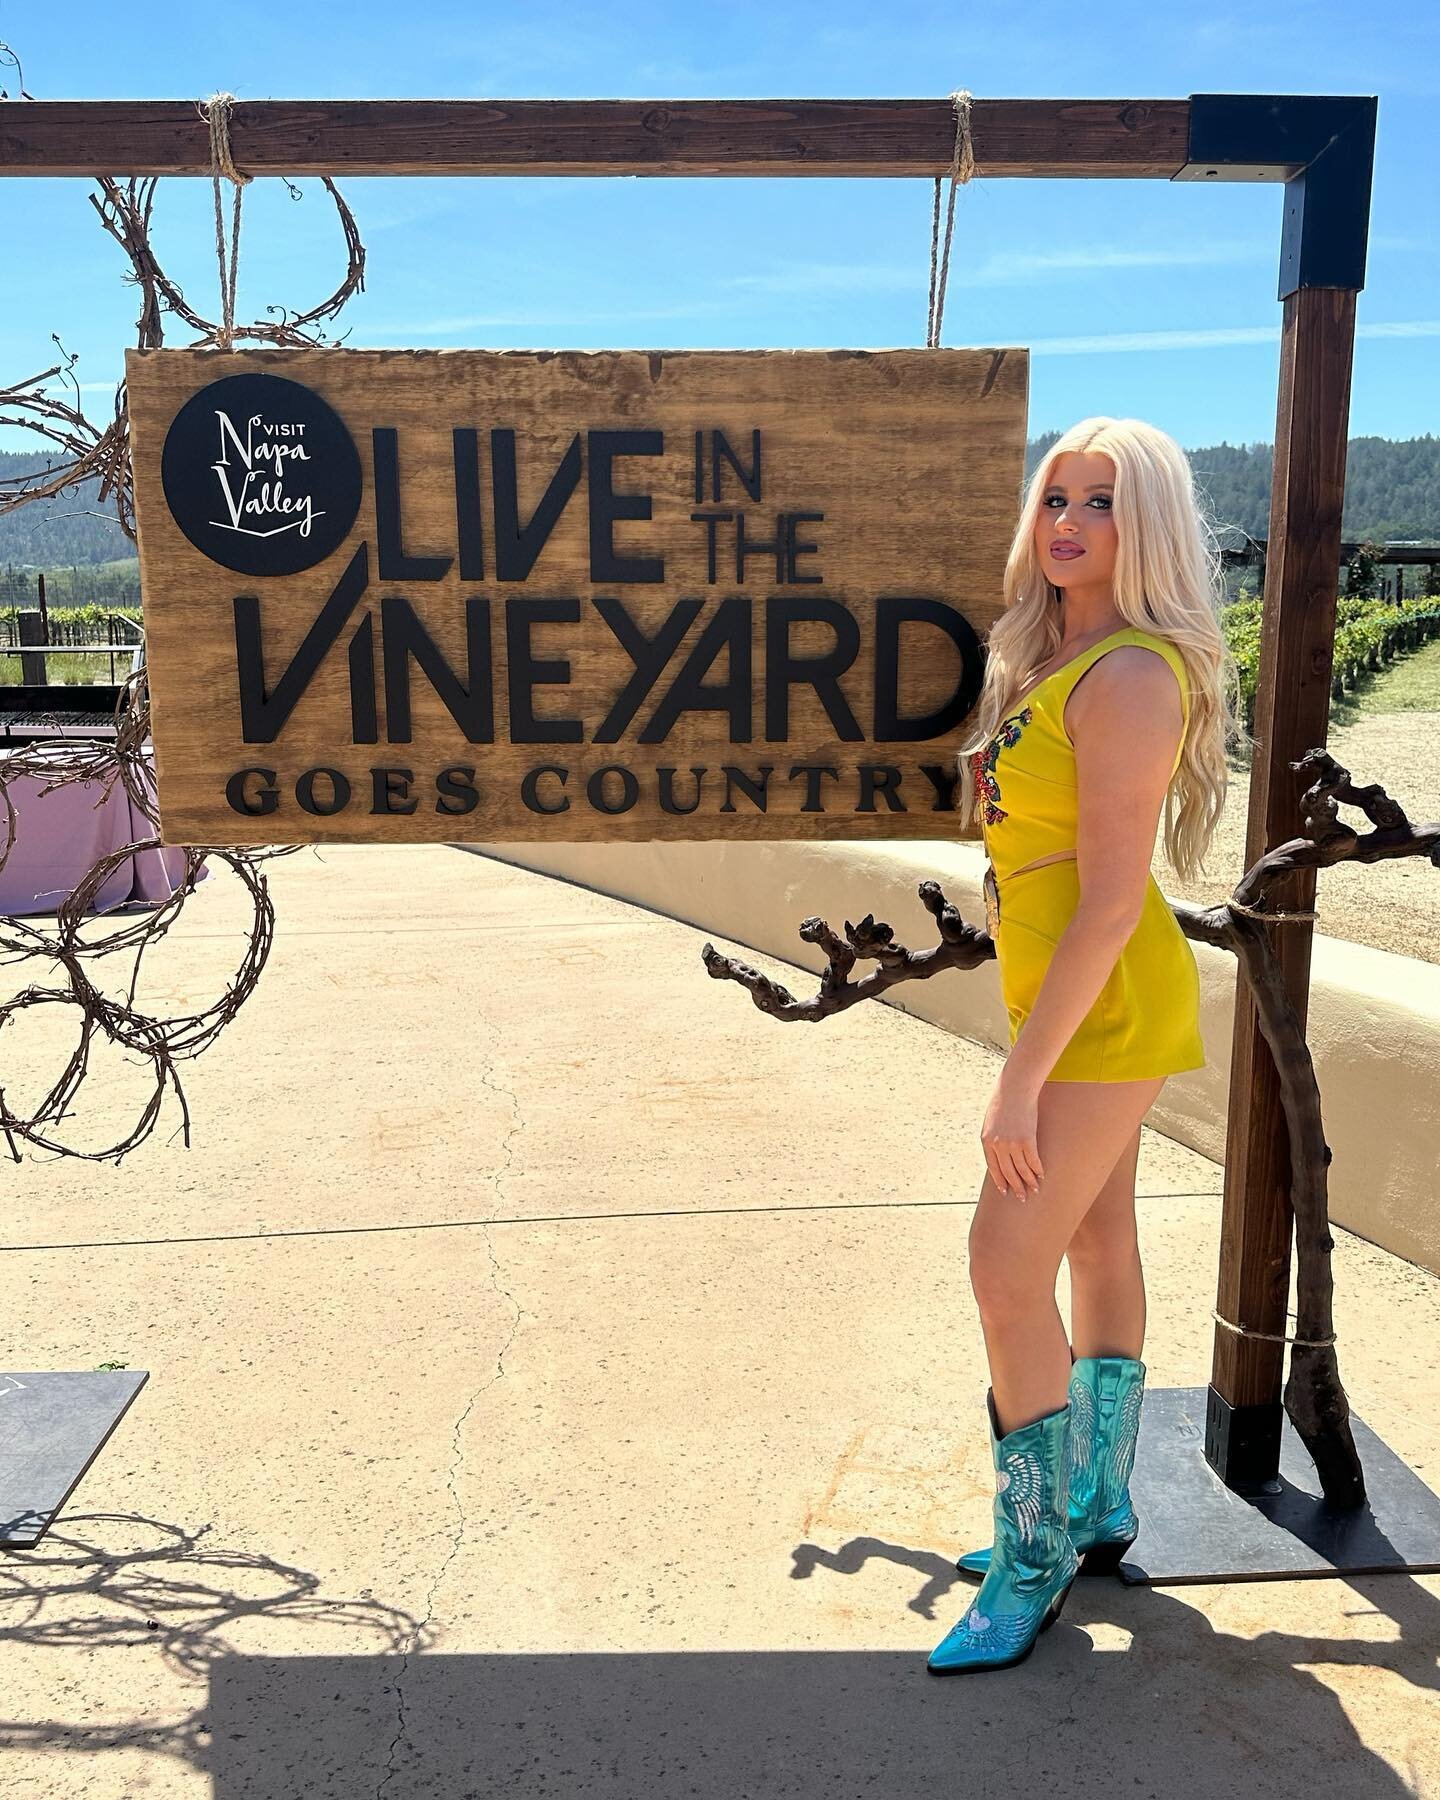 Hell of a week at @liveinthevineyard 🍷  When people would ask me if I&rsquo;m having a good time, I&rsquo;d say music &amp; wine in Napa what&rsquo;s better?! Thankful for my people, the new friends I met &amp; a special thank you to @bobbiijacobsli